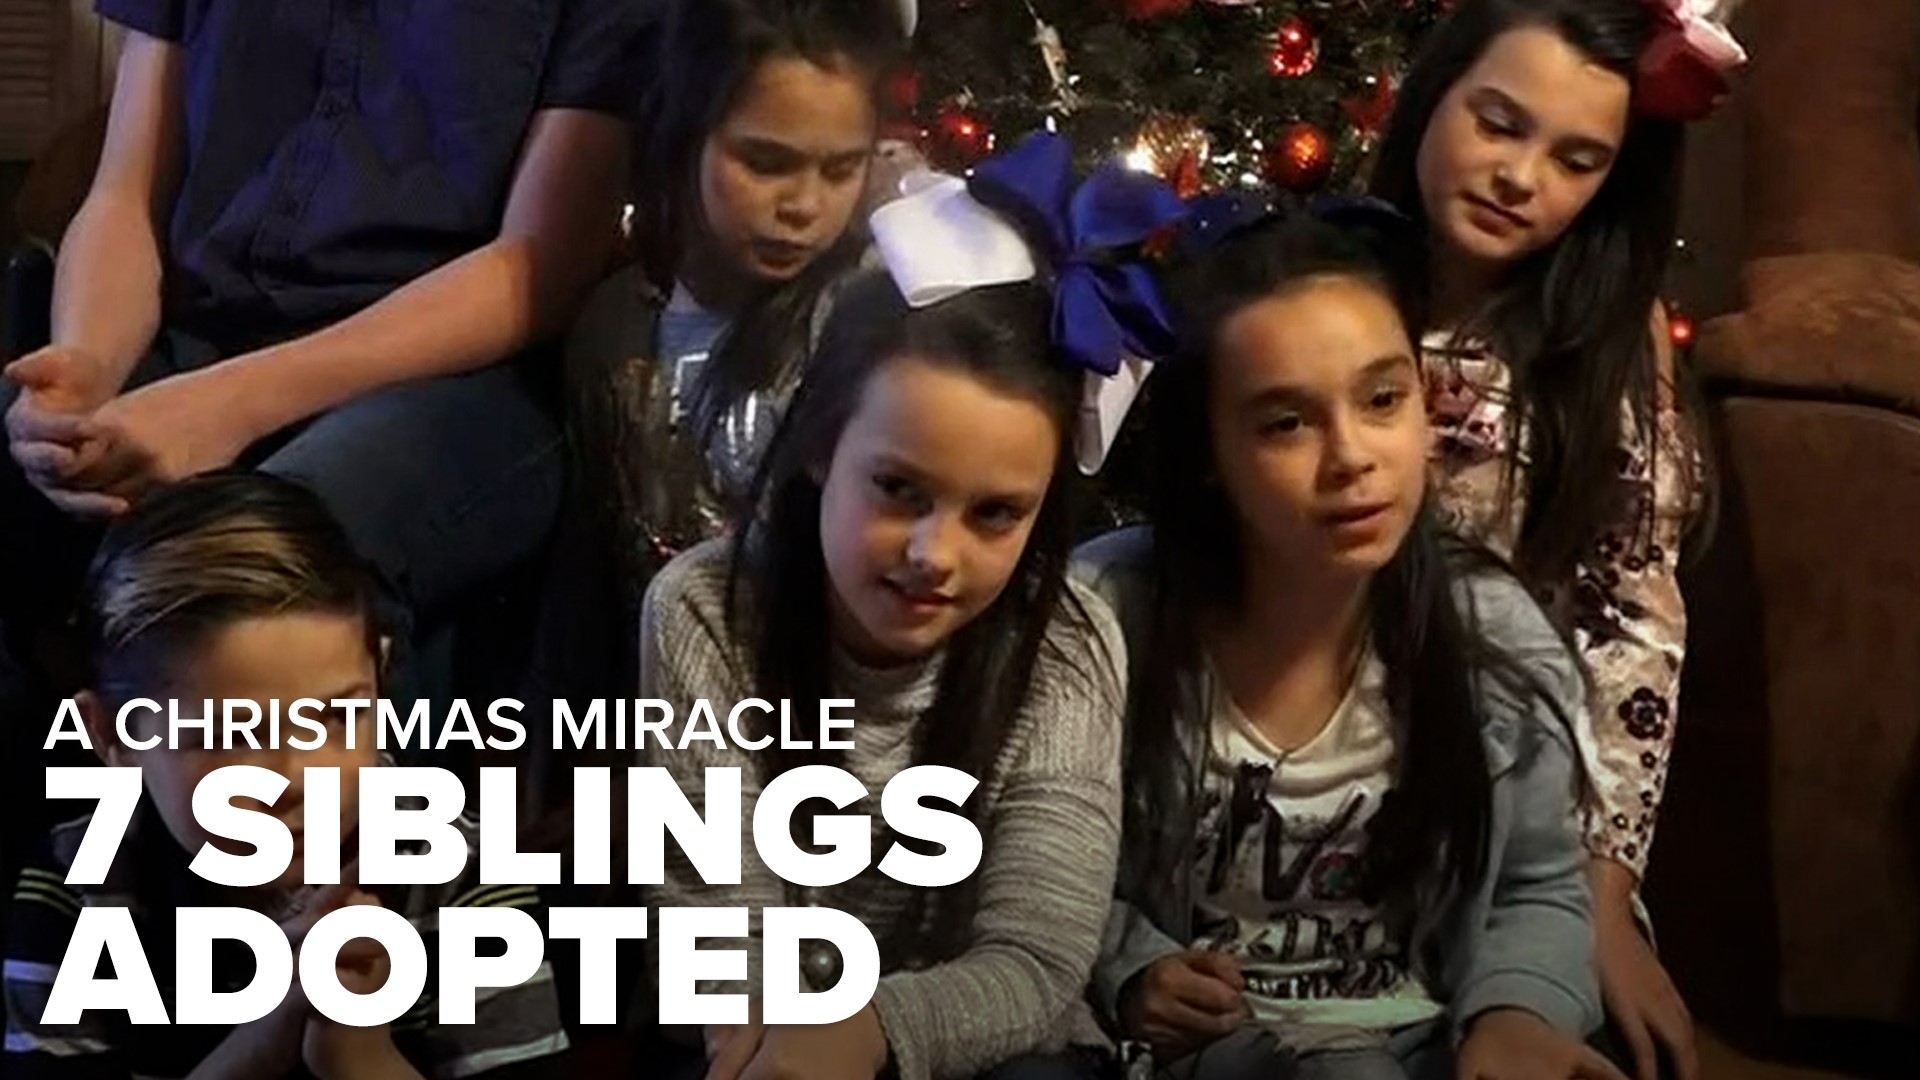 In 2018, 7 siblings were adopted by an Arkansas couple right around Christmas. We spoke to them for the holidays and several months later.